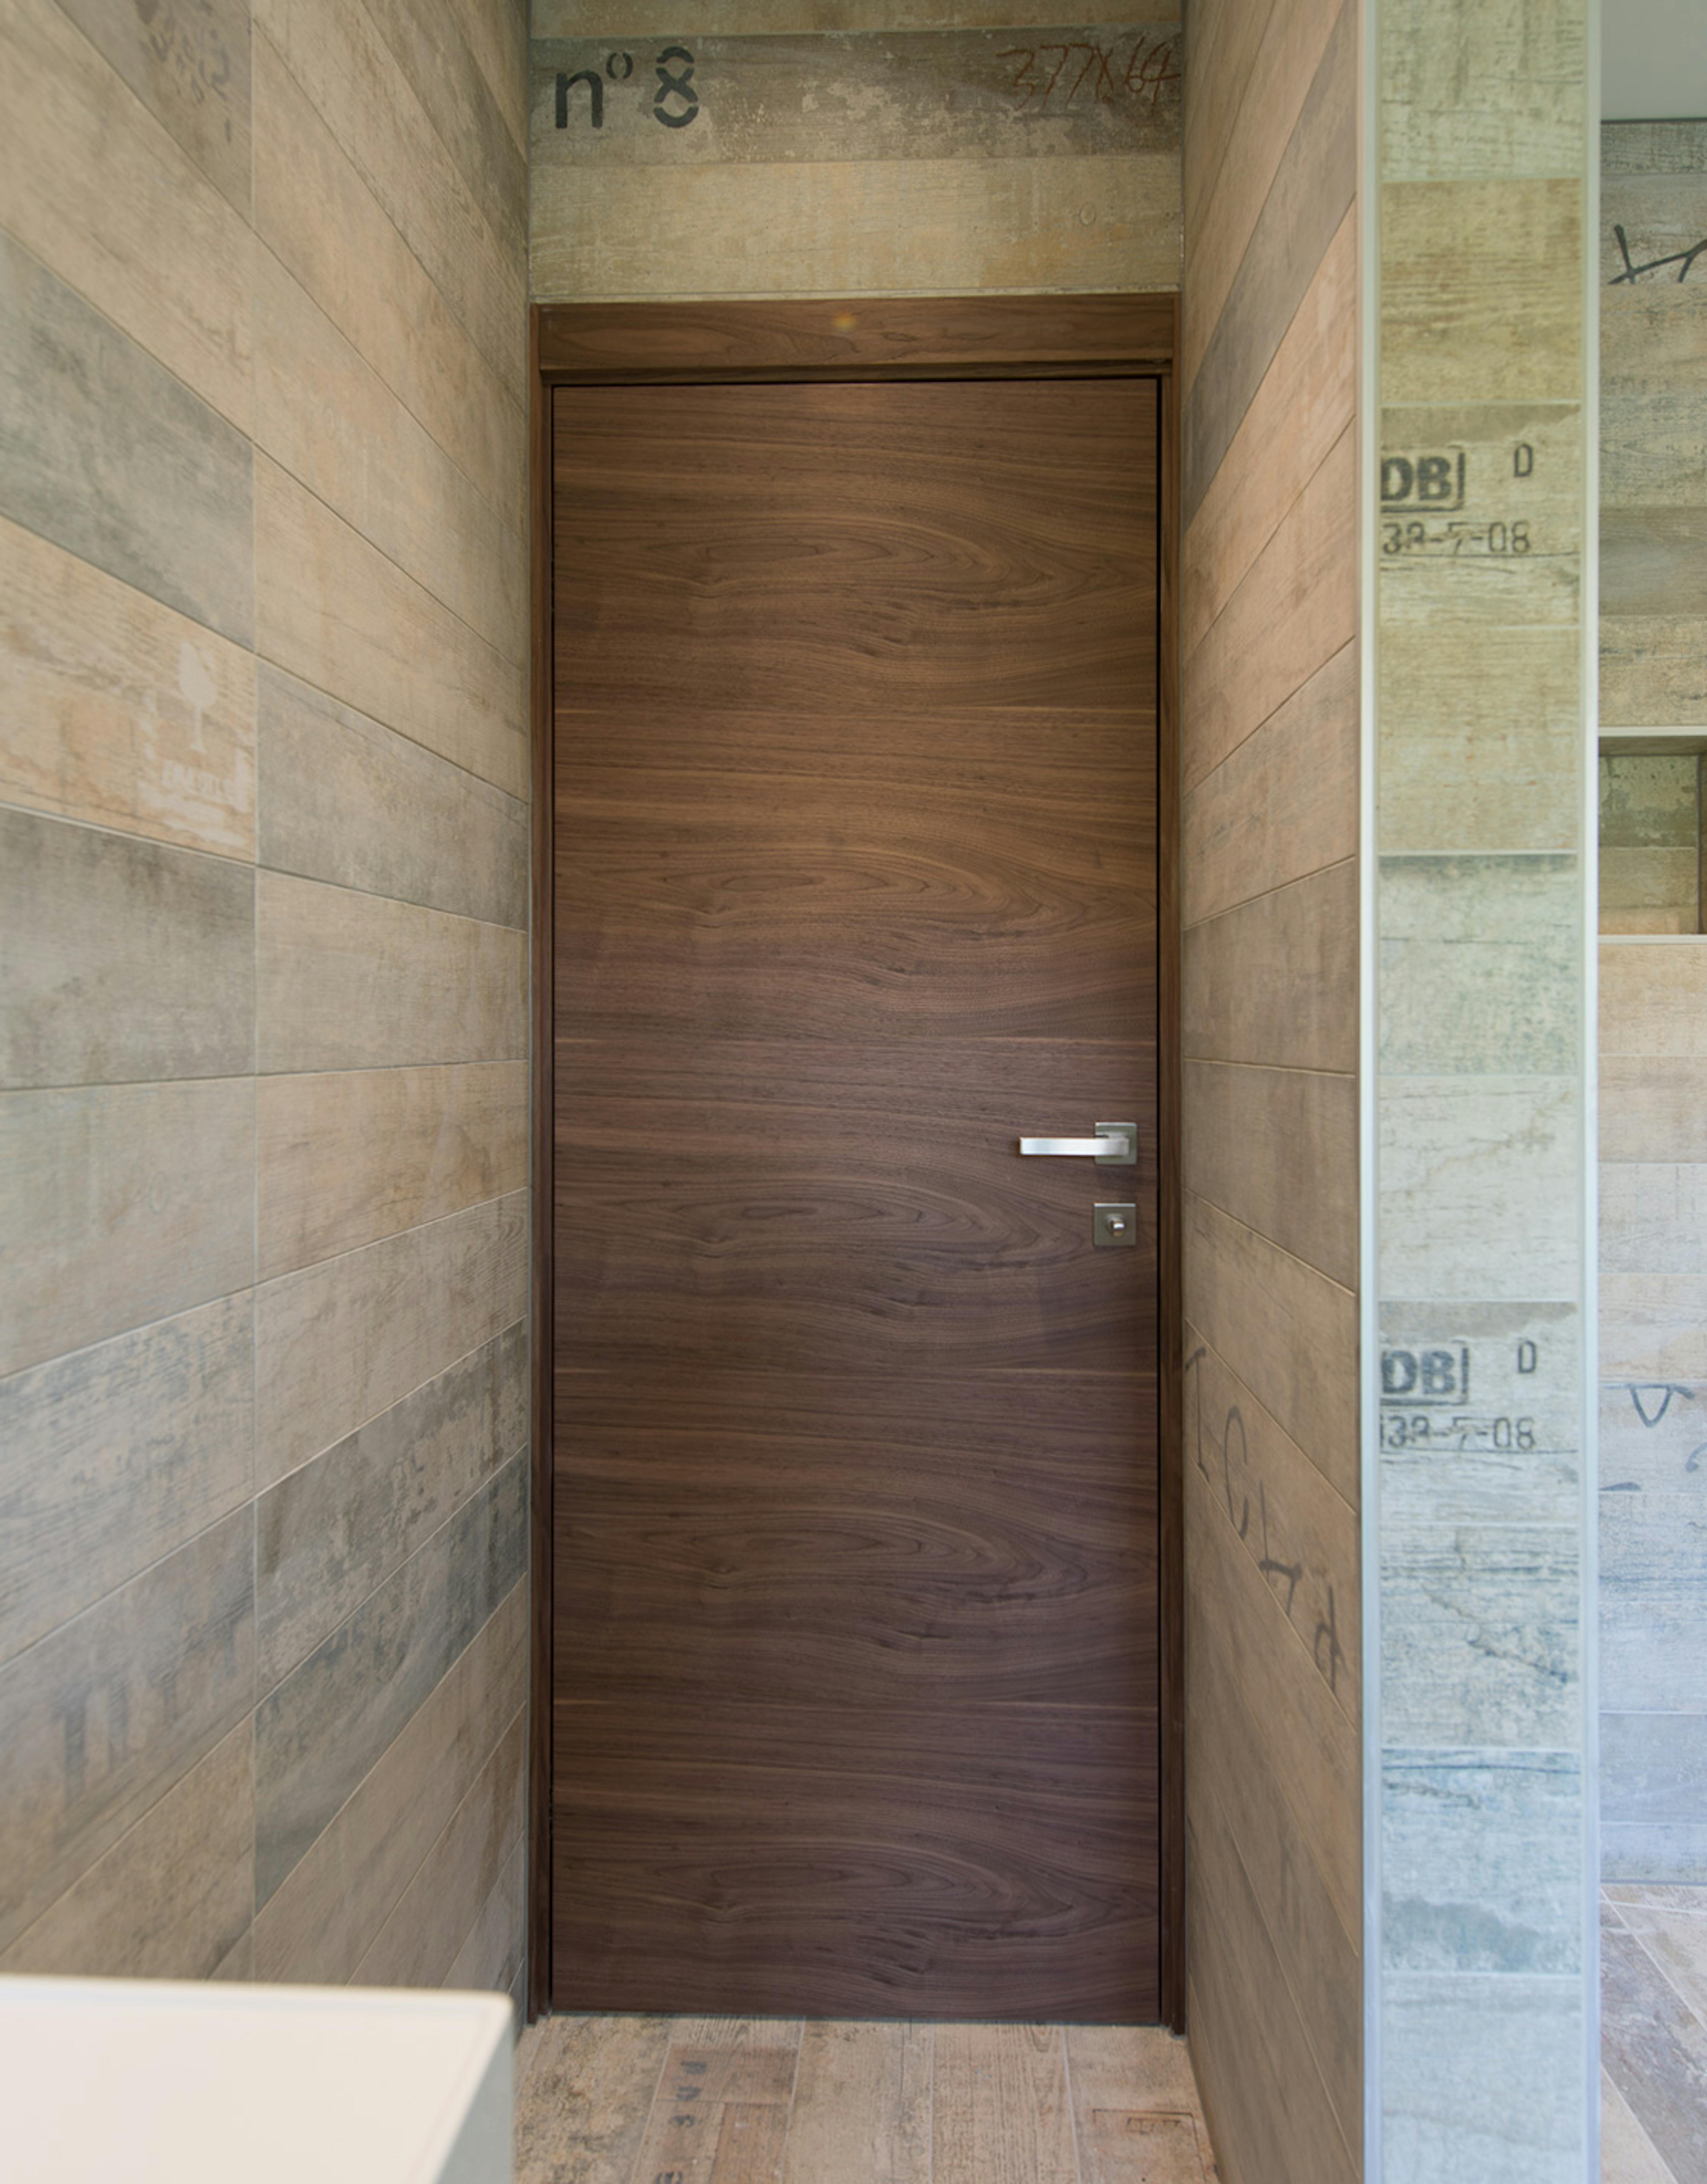 Bathroom with Deuren's contemporary internal door set -  Trem H style in Walnut finish with chrome lever handle.